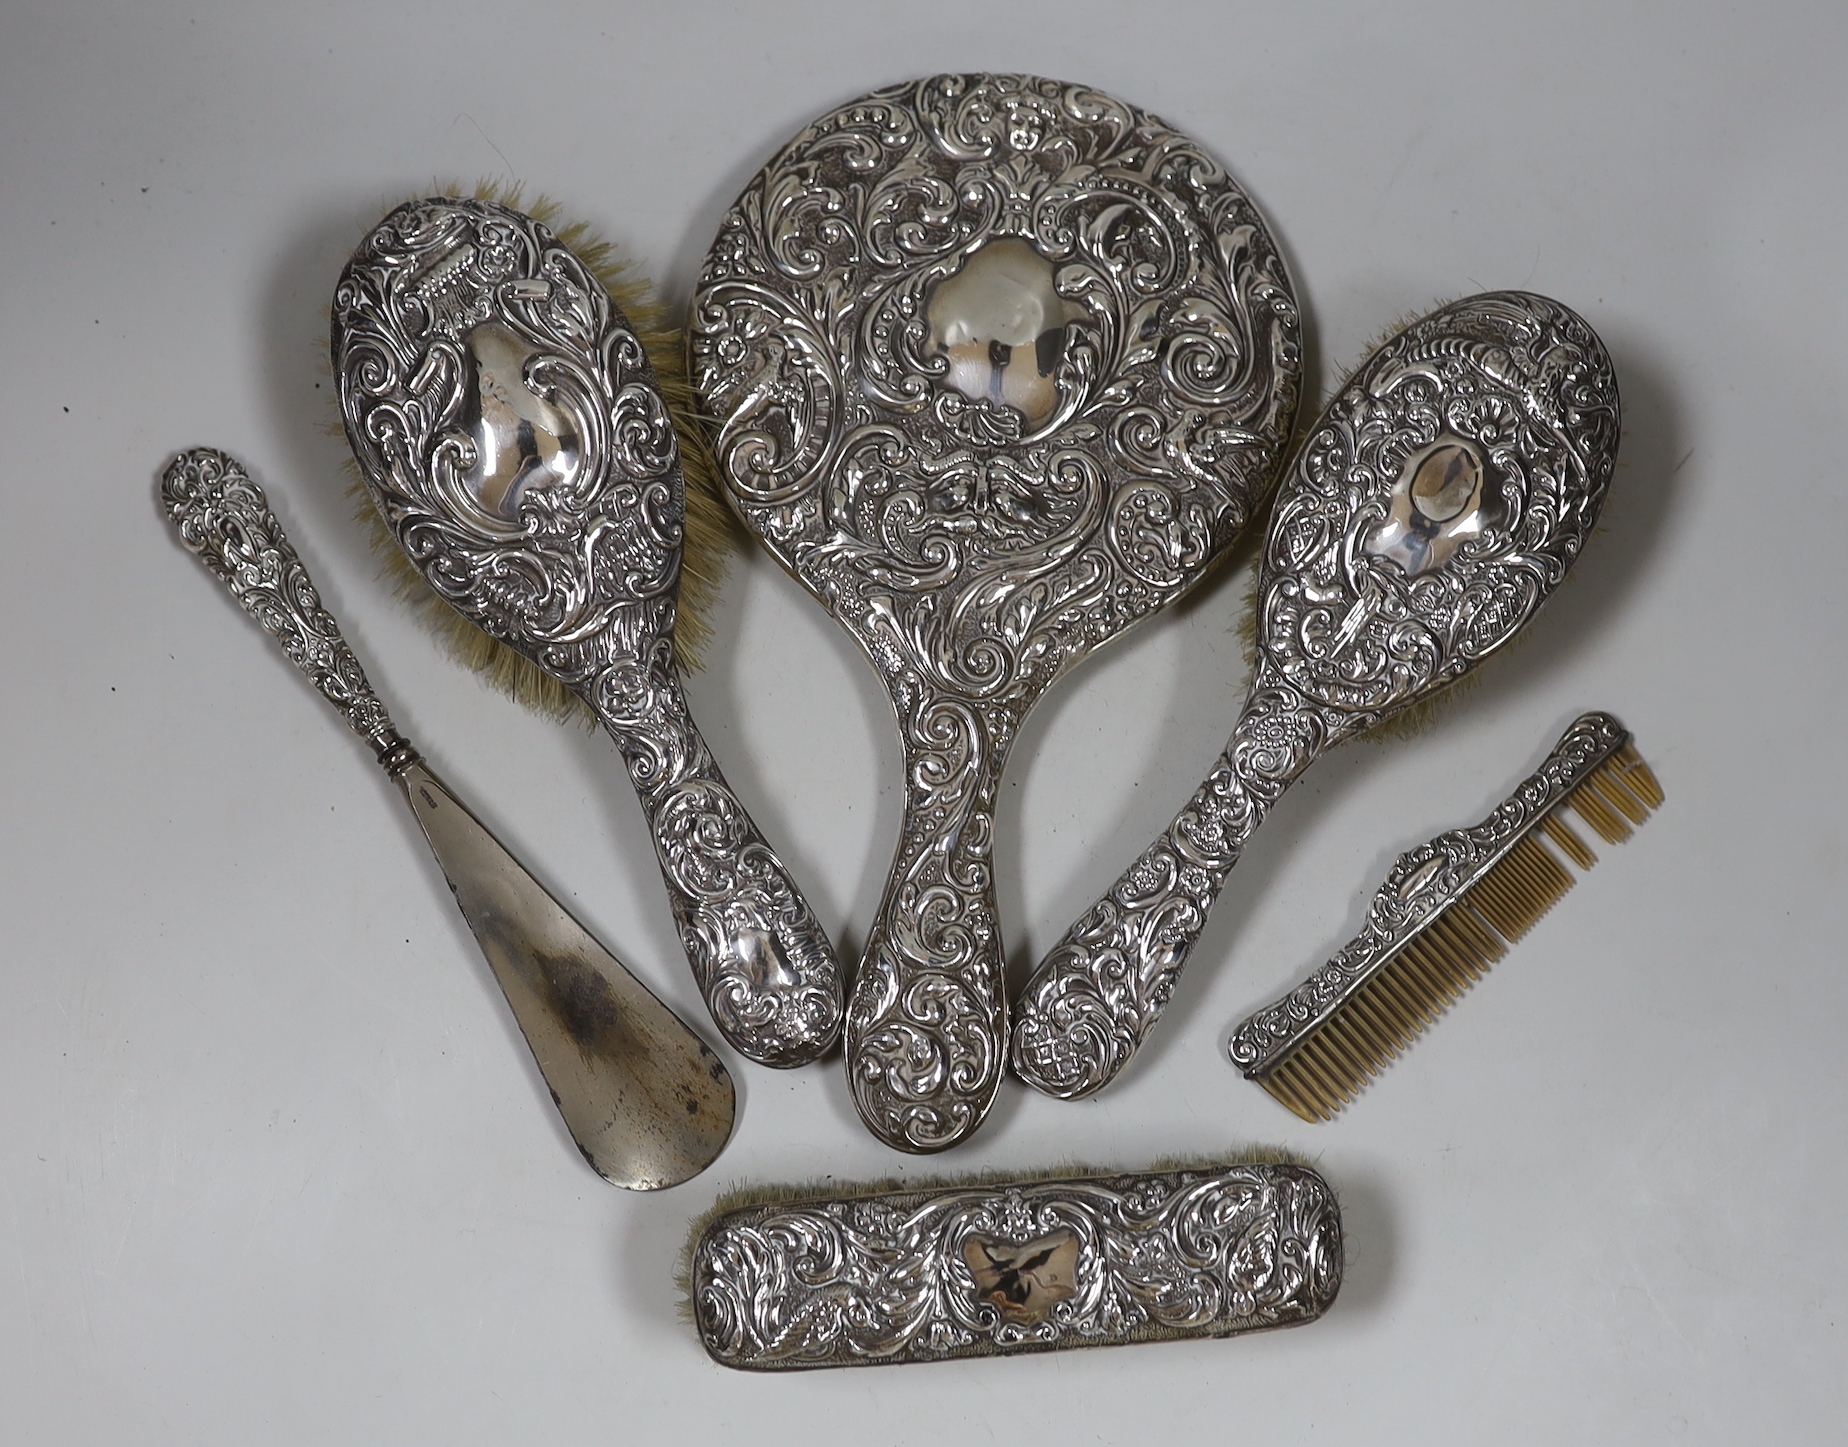 A late Victorian repousse silver mounted six piece mirror and brush set, Chester, 1900.